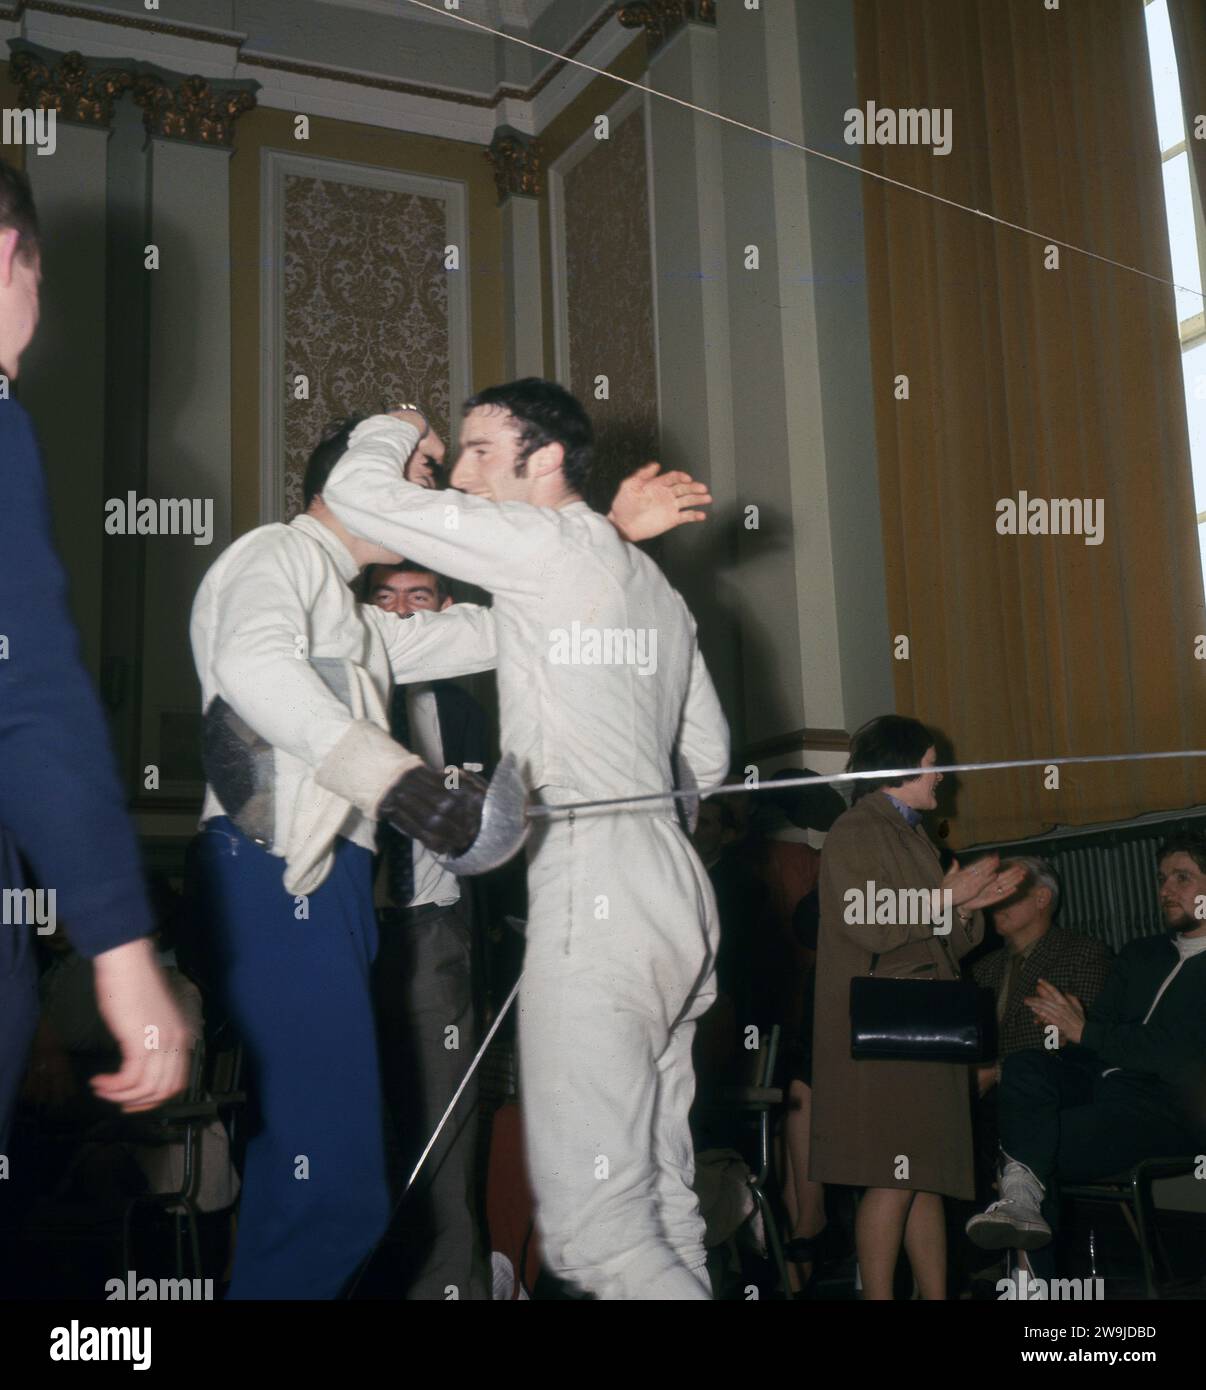 1960s, historical, good sportsmen ship, after an exhuasting contest two male fencers congratulate each other, England, UK. Stock Photo